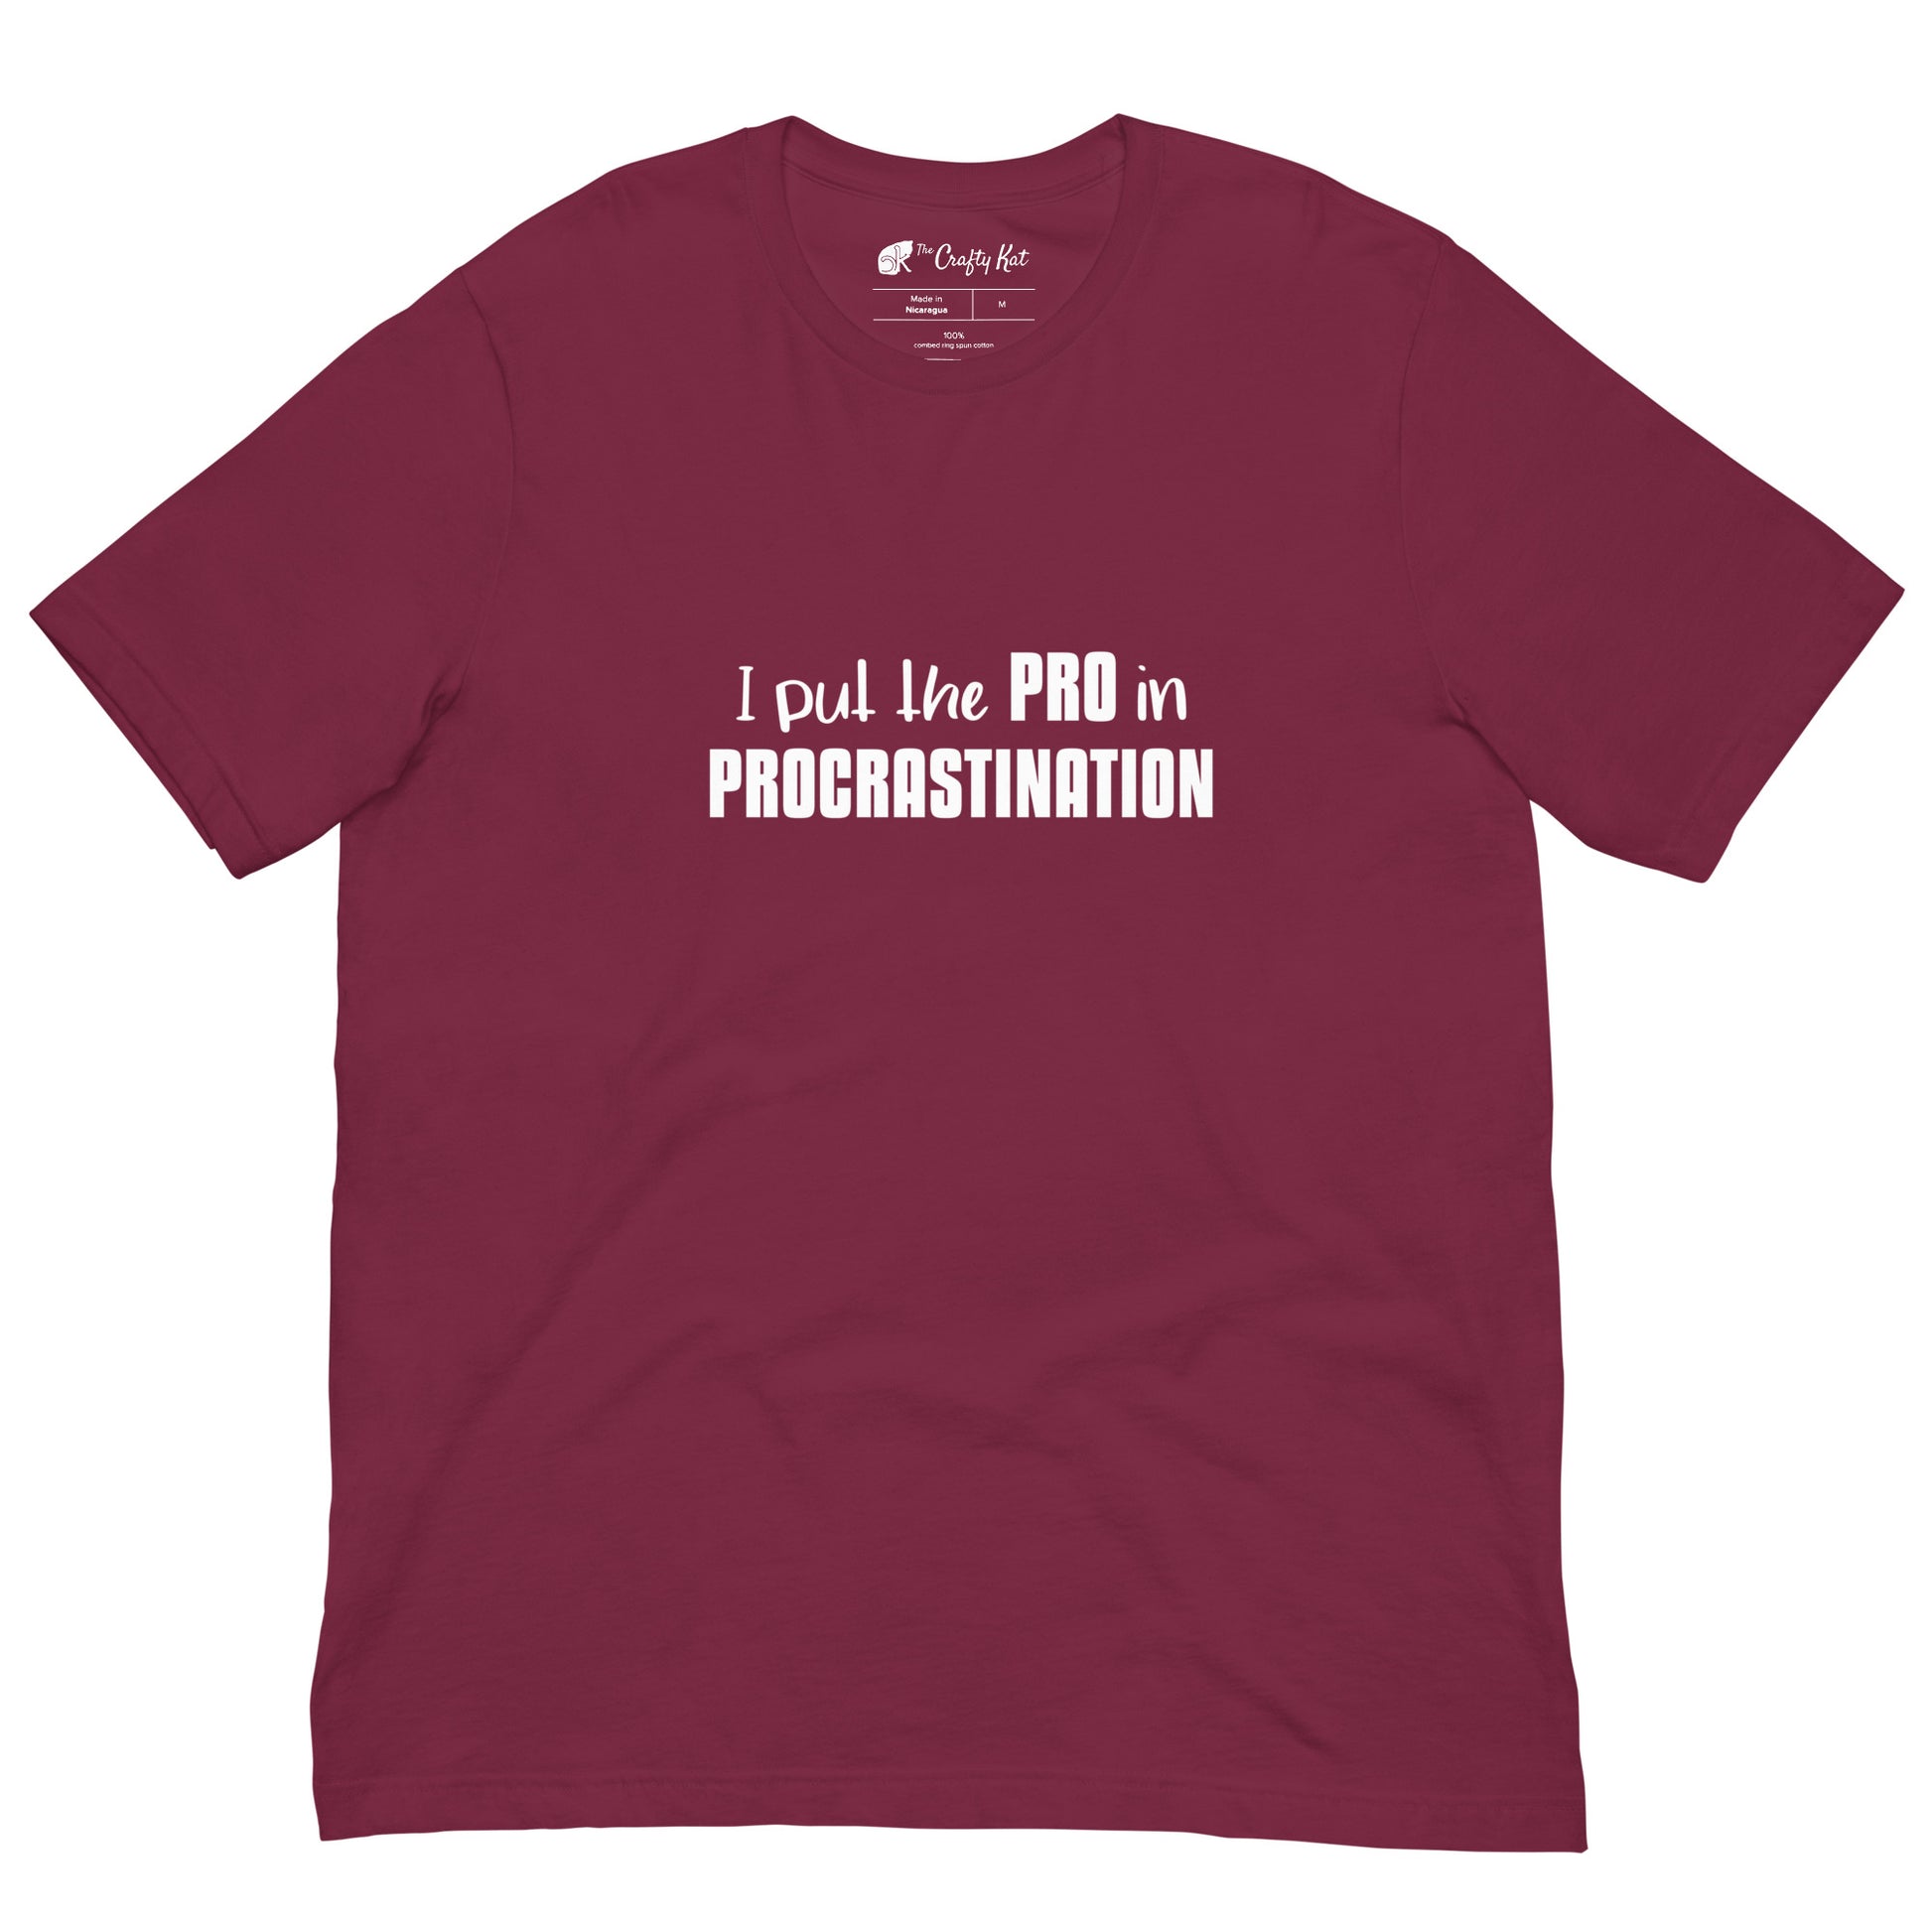 Maroon unisex t-shirt with text graphic: "I put the PRO in PROCRASTINATION"